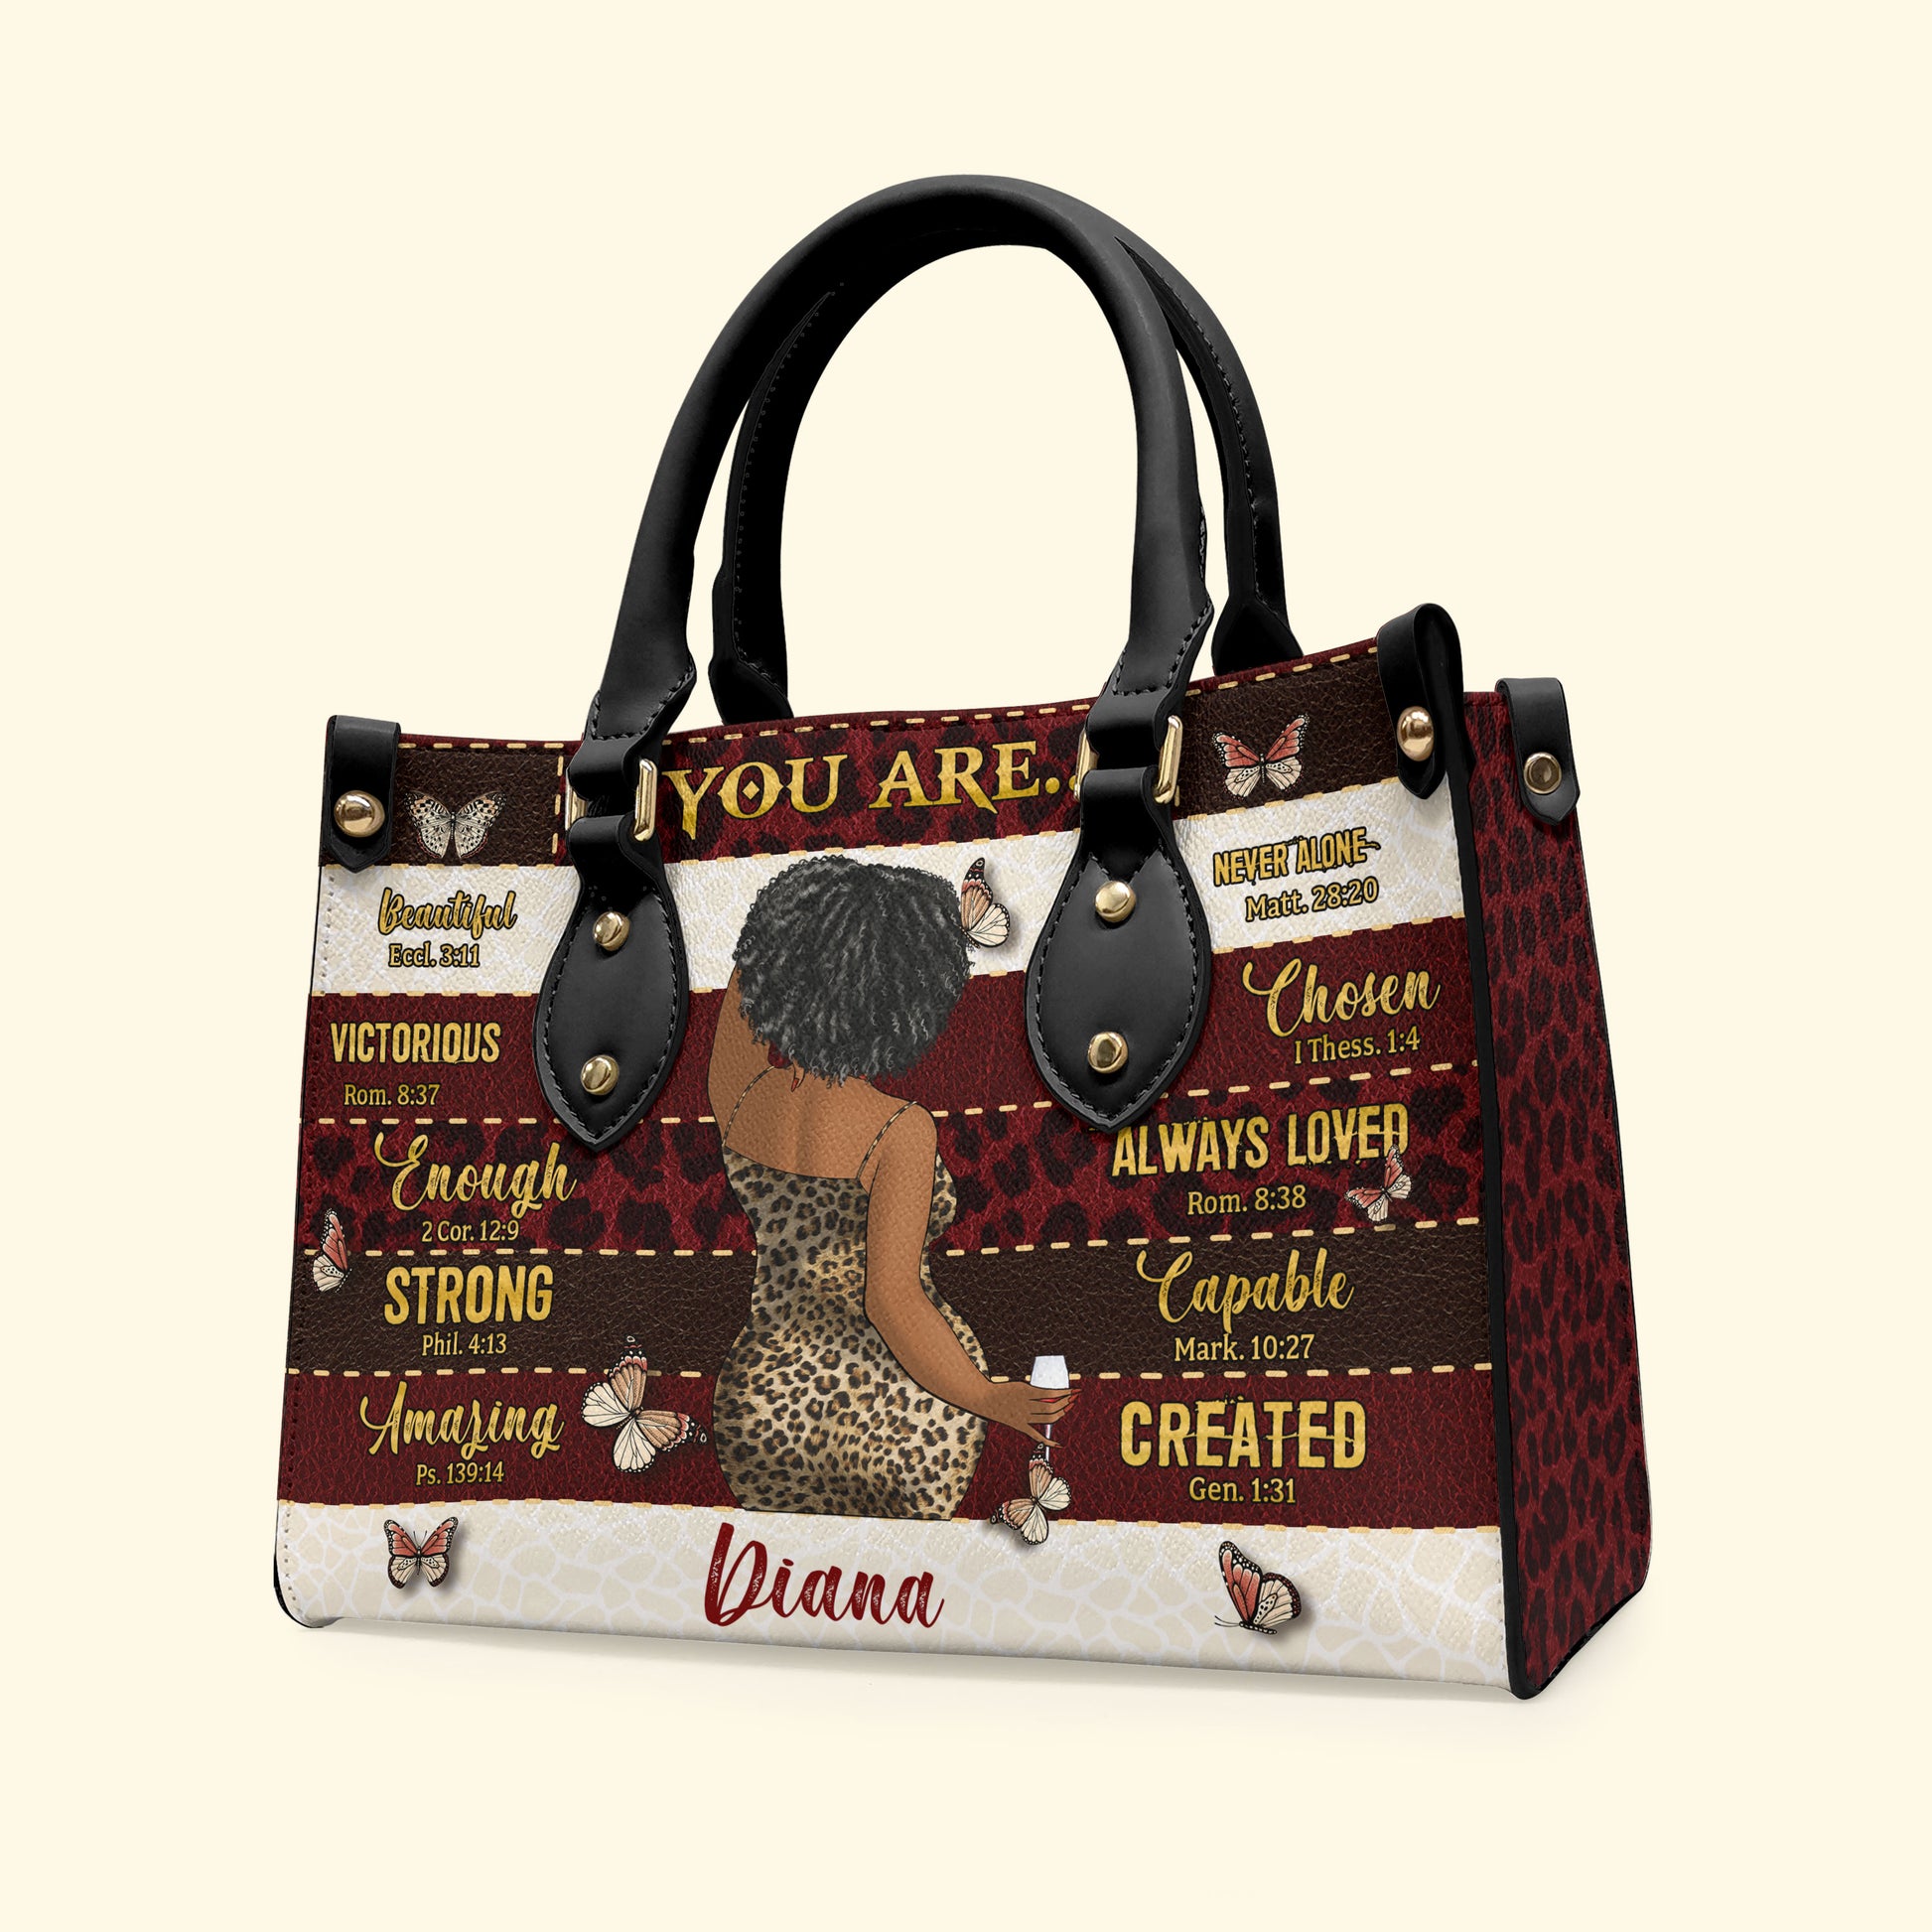 You Are Beautiful Enough Victorious - Personalized Leather Bag - Birthday, Black Month History Gift For Black Woman